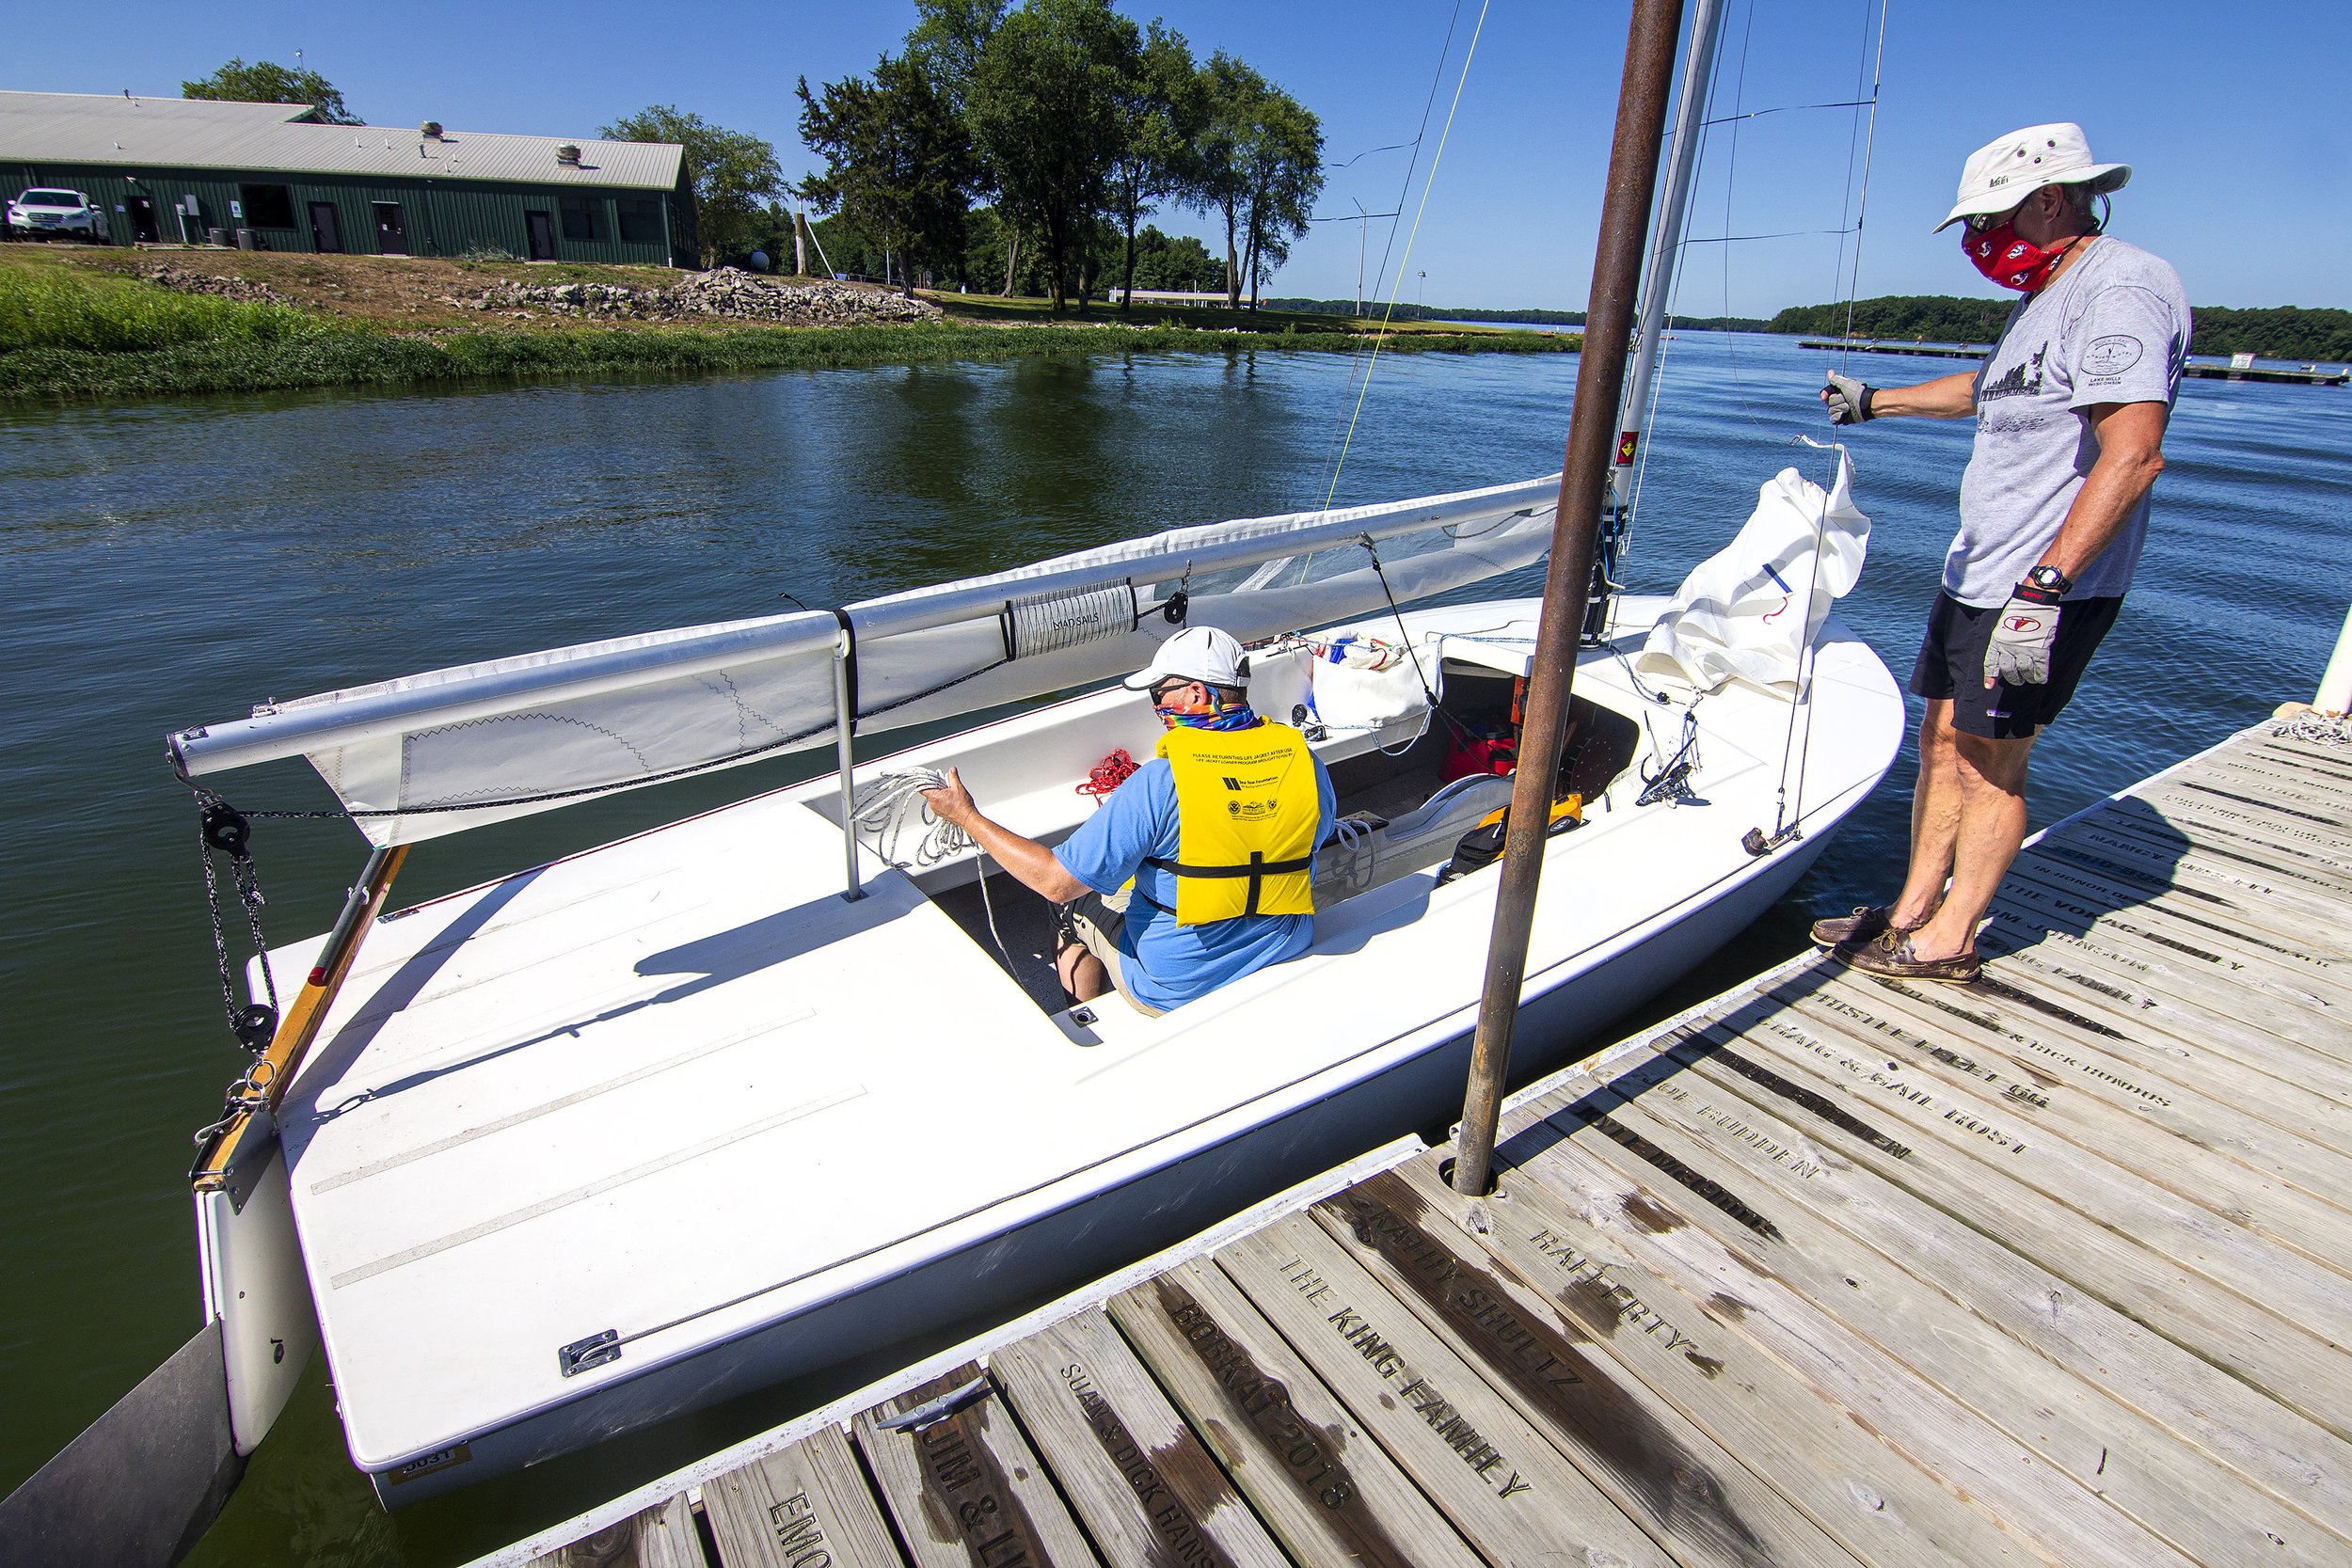  US Sailing-certified instructor Jim Colegrove, right, observes as student Alan Schuele makes preparations during a lesson Sunday, July 12, 2020, on Clinton Lake. The lessons are offered by the Clinton Lake Sailing Association. 